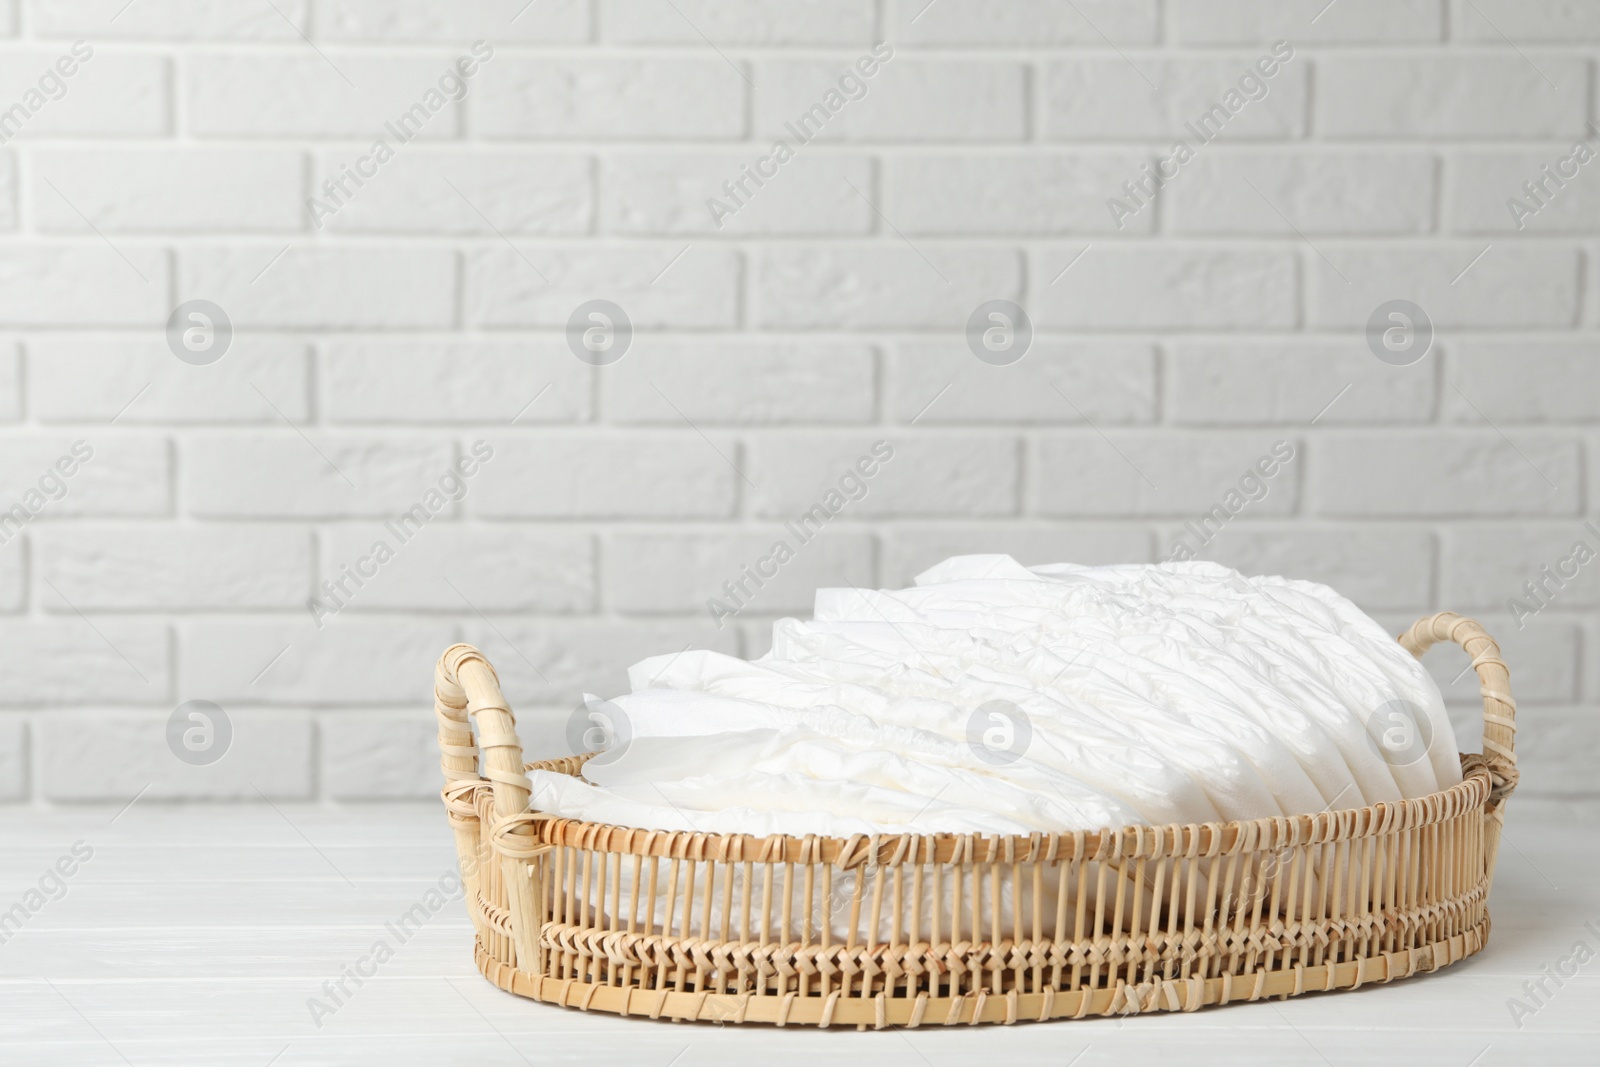 Photo of Tray with baby diapers on wooden table against white brick wall. Space for text